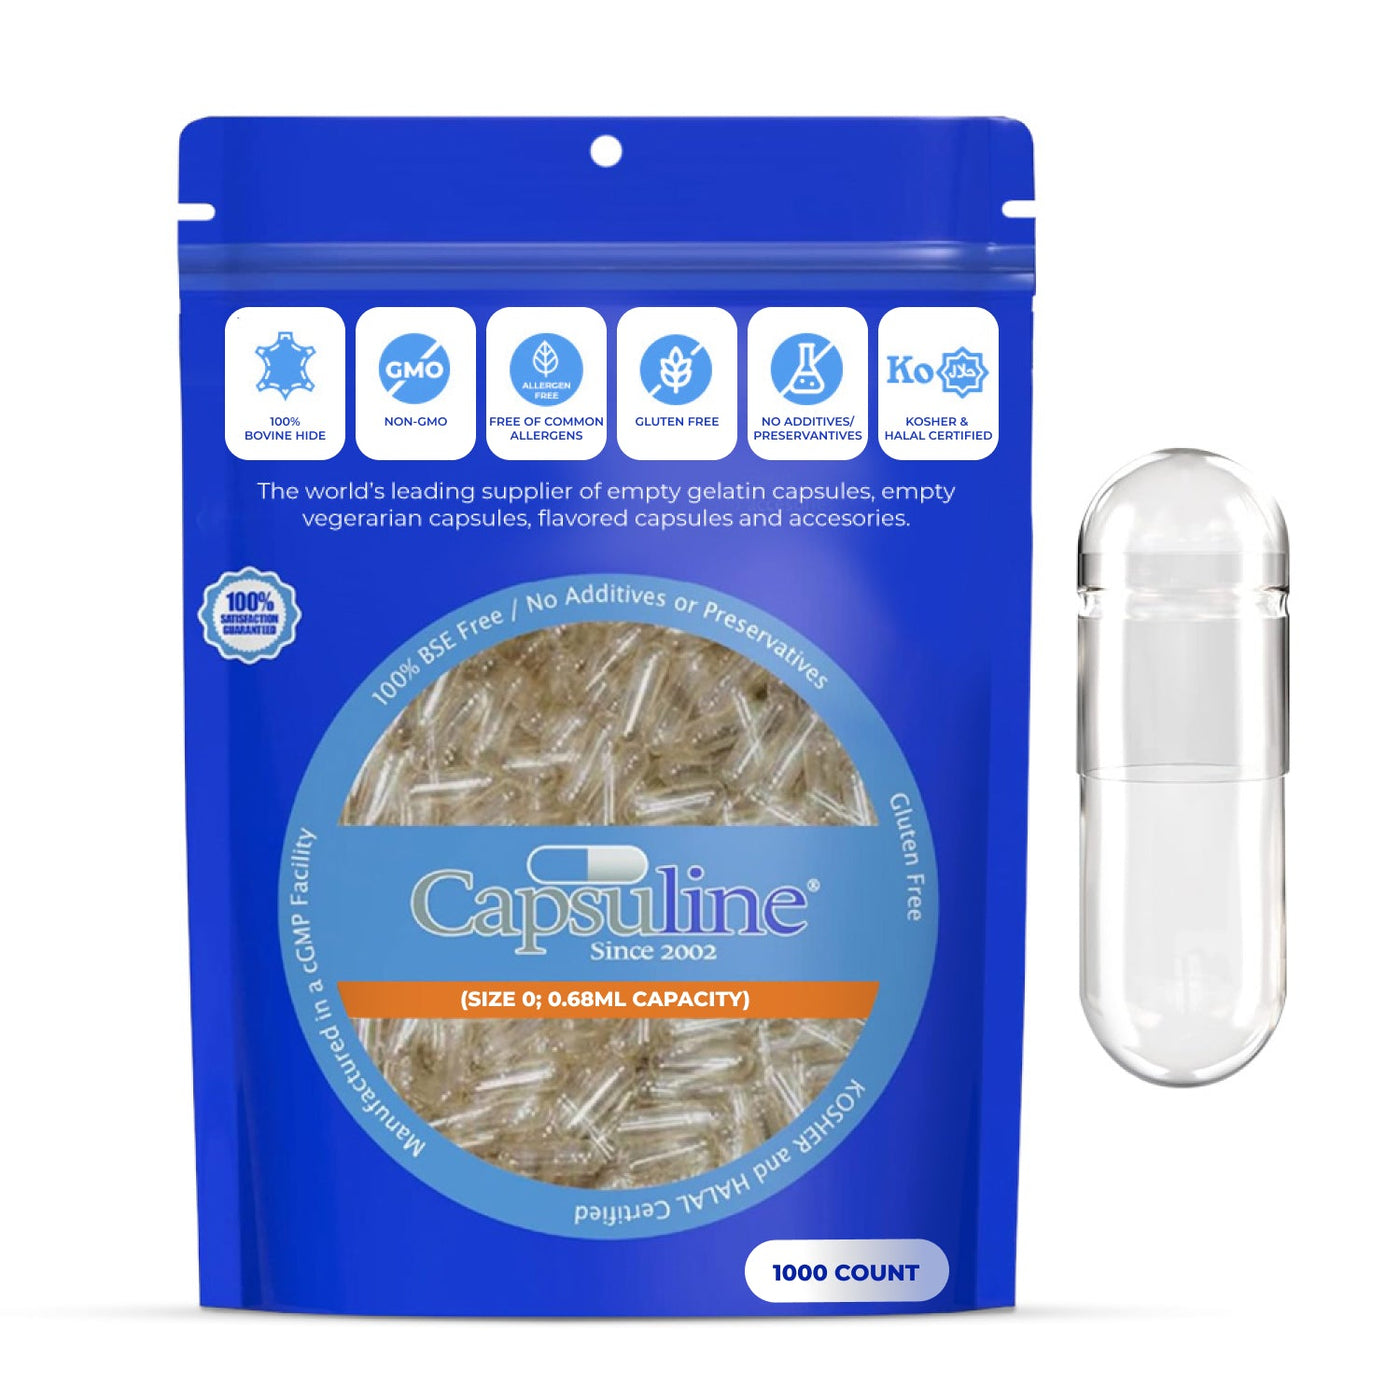 Clear Size 0 Empty Gelatin Capsules by Capsuline - 1000 Count - 1000